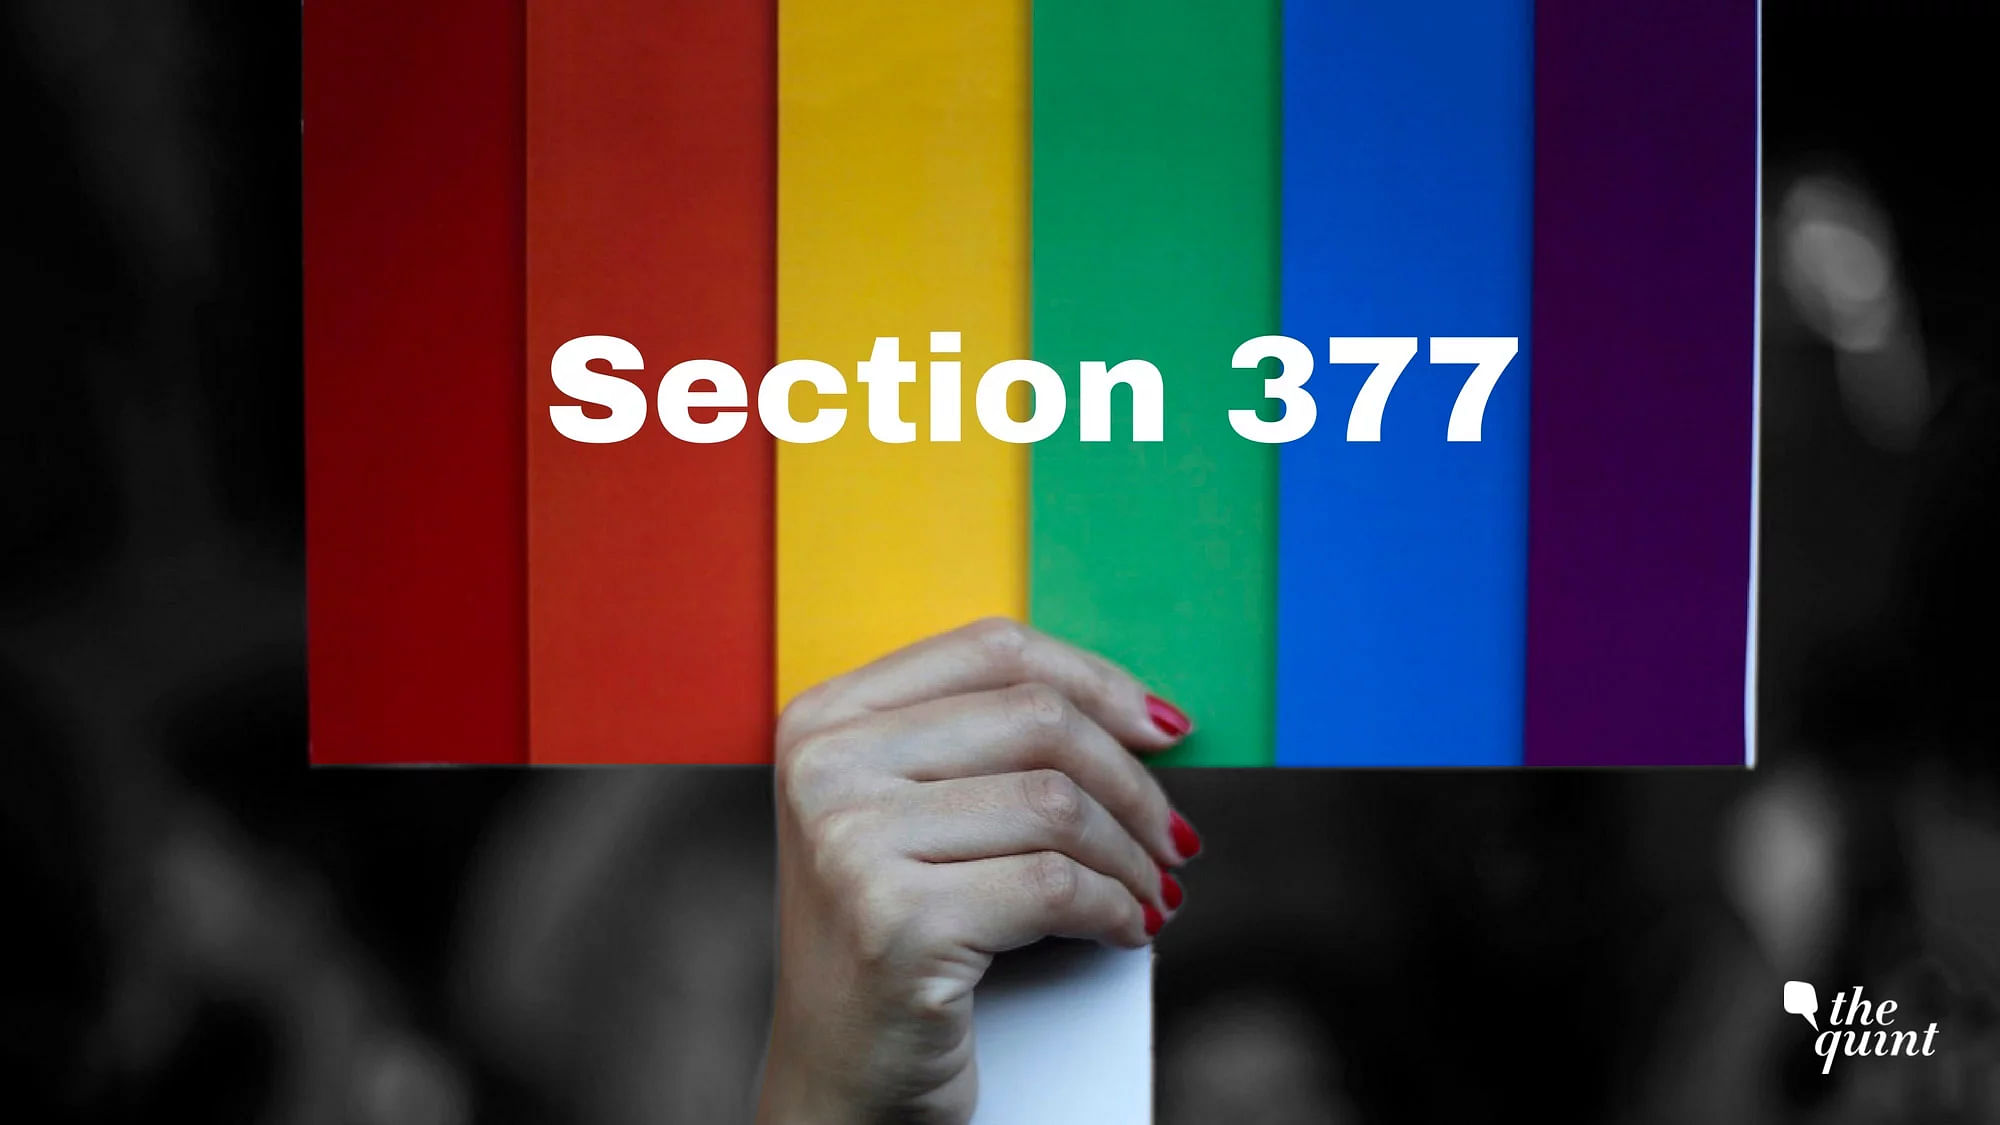 The SC will conclude hearings on constitutionality of Section 377 on Tuesday